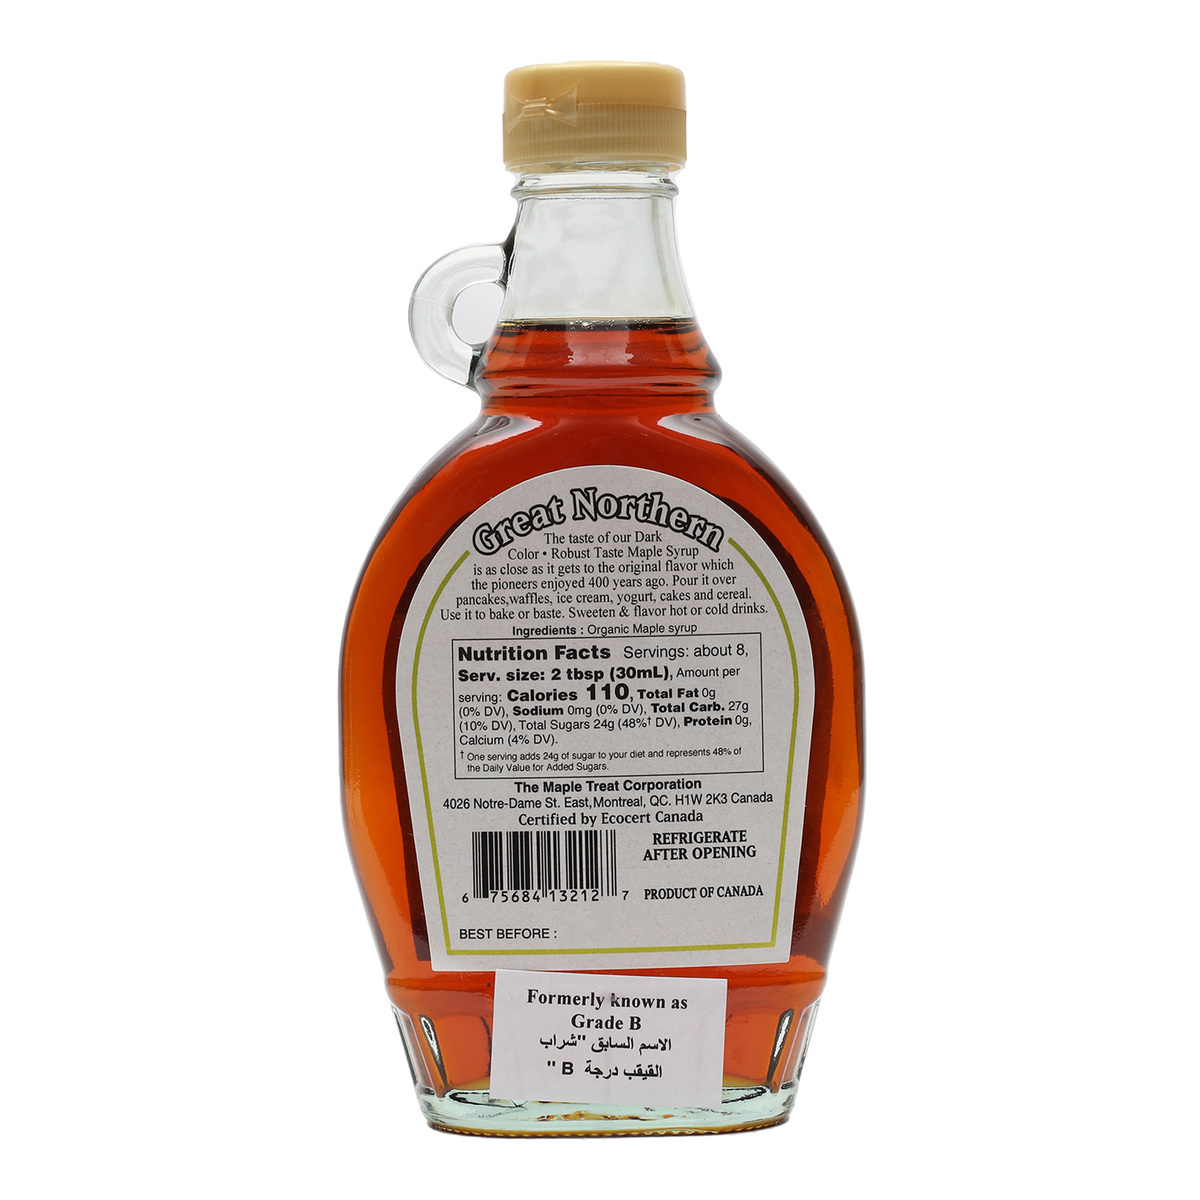 Great Northern Maple Syrup Grade-A 236ml